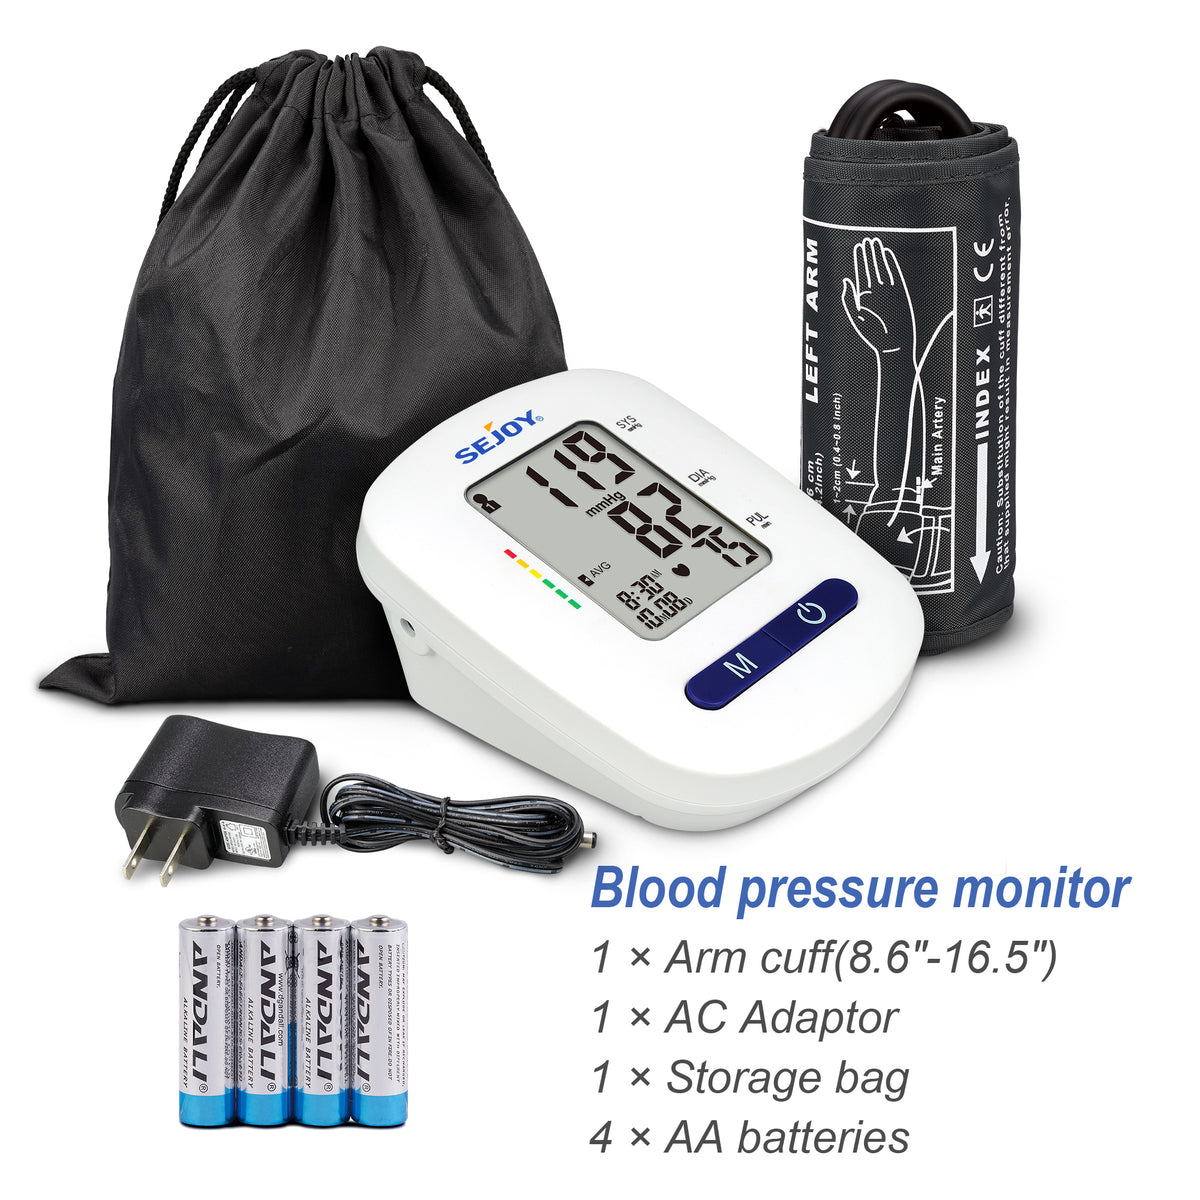 Automatic blood pressure monitor - DBP-01P - Shenzhen Hingmed Medical  Instrument Co.,Ltd. - for doctor's office / double-arm / oscillometric